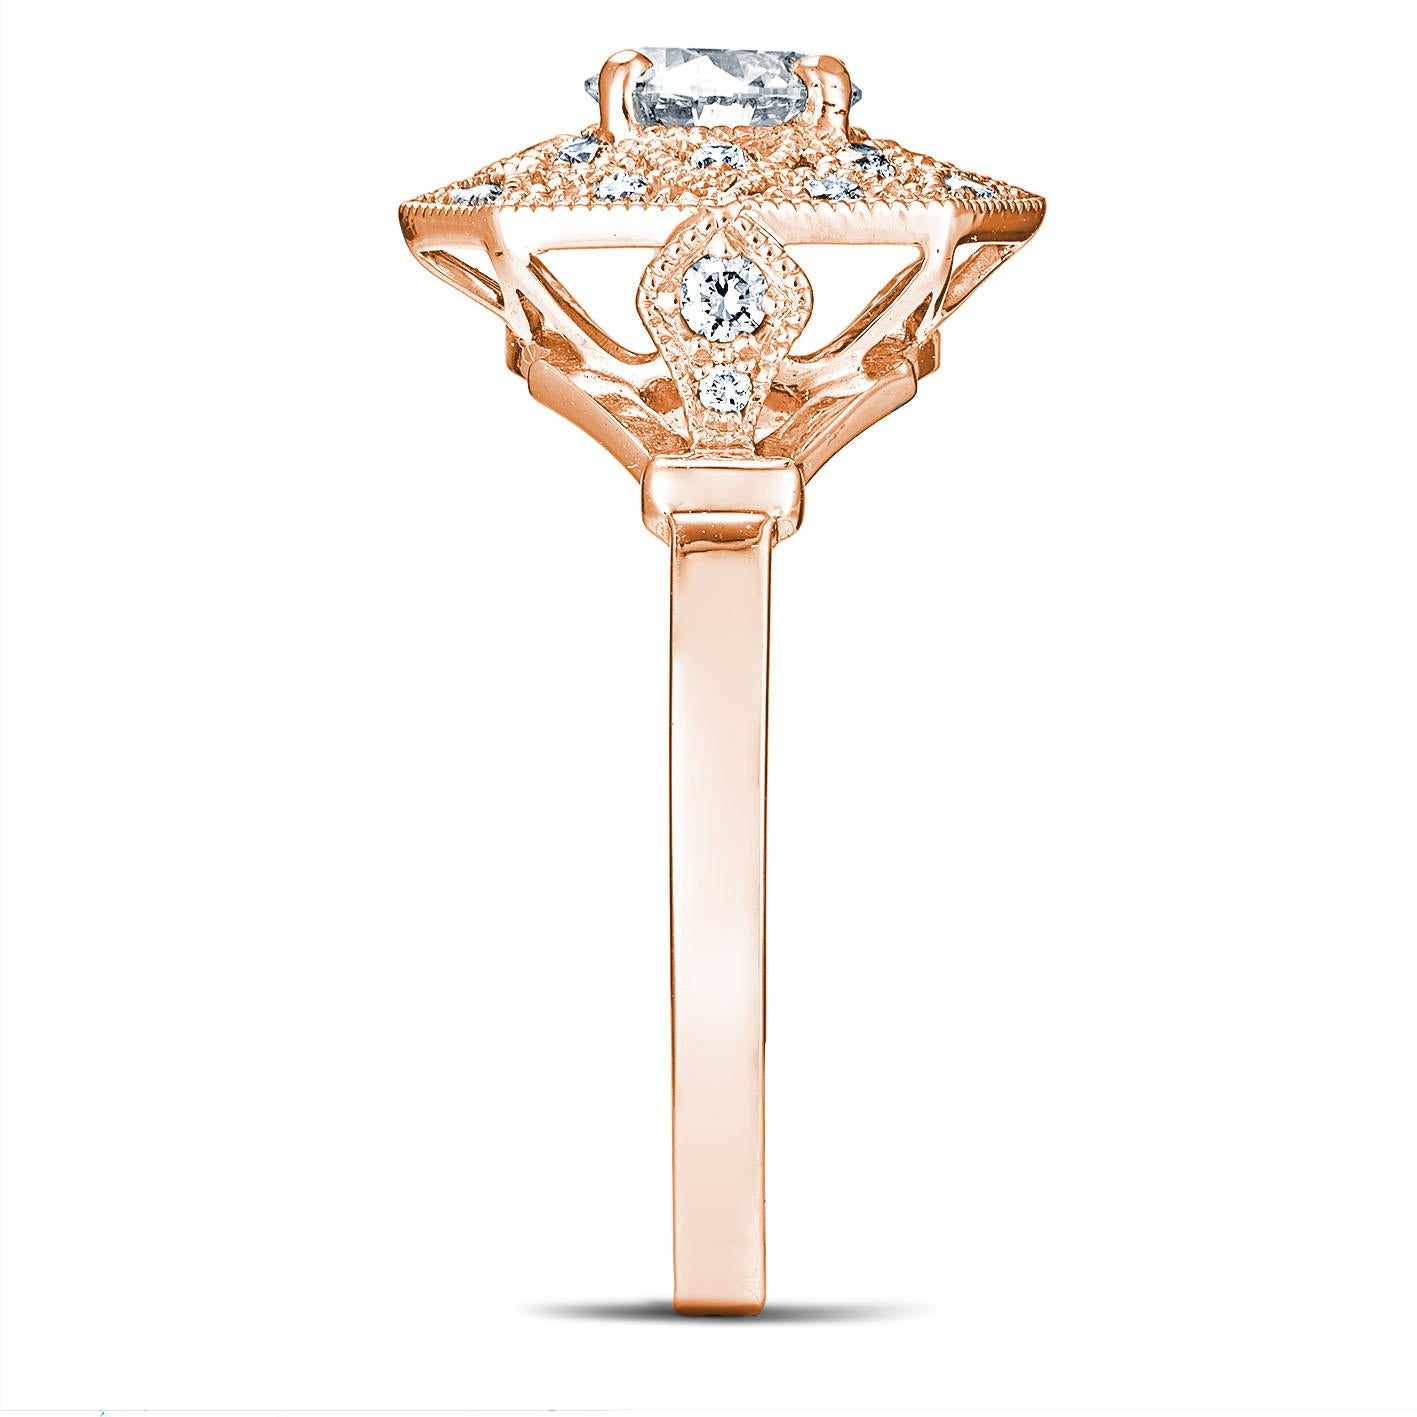 For Sale:  18k Rose Gold 0.40 Ct GIA Certified Diamond Ring set with 0.16 Cts of Diamonds 3